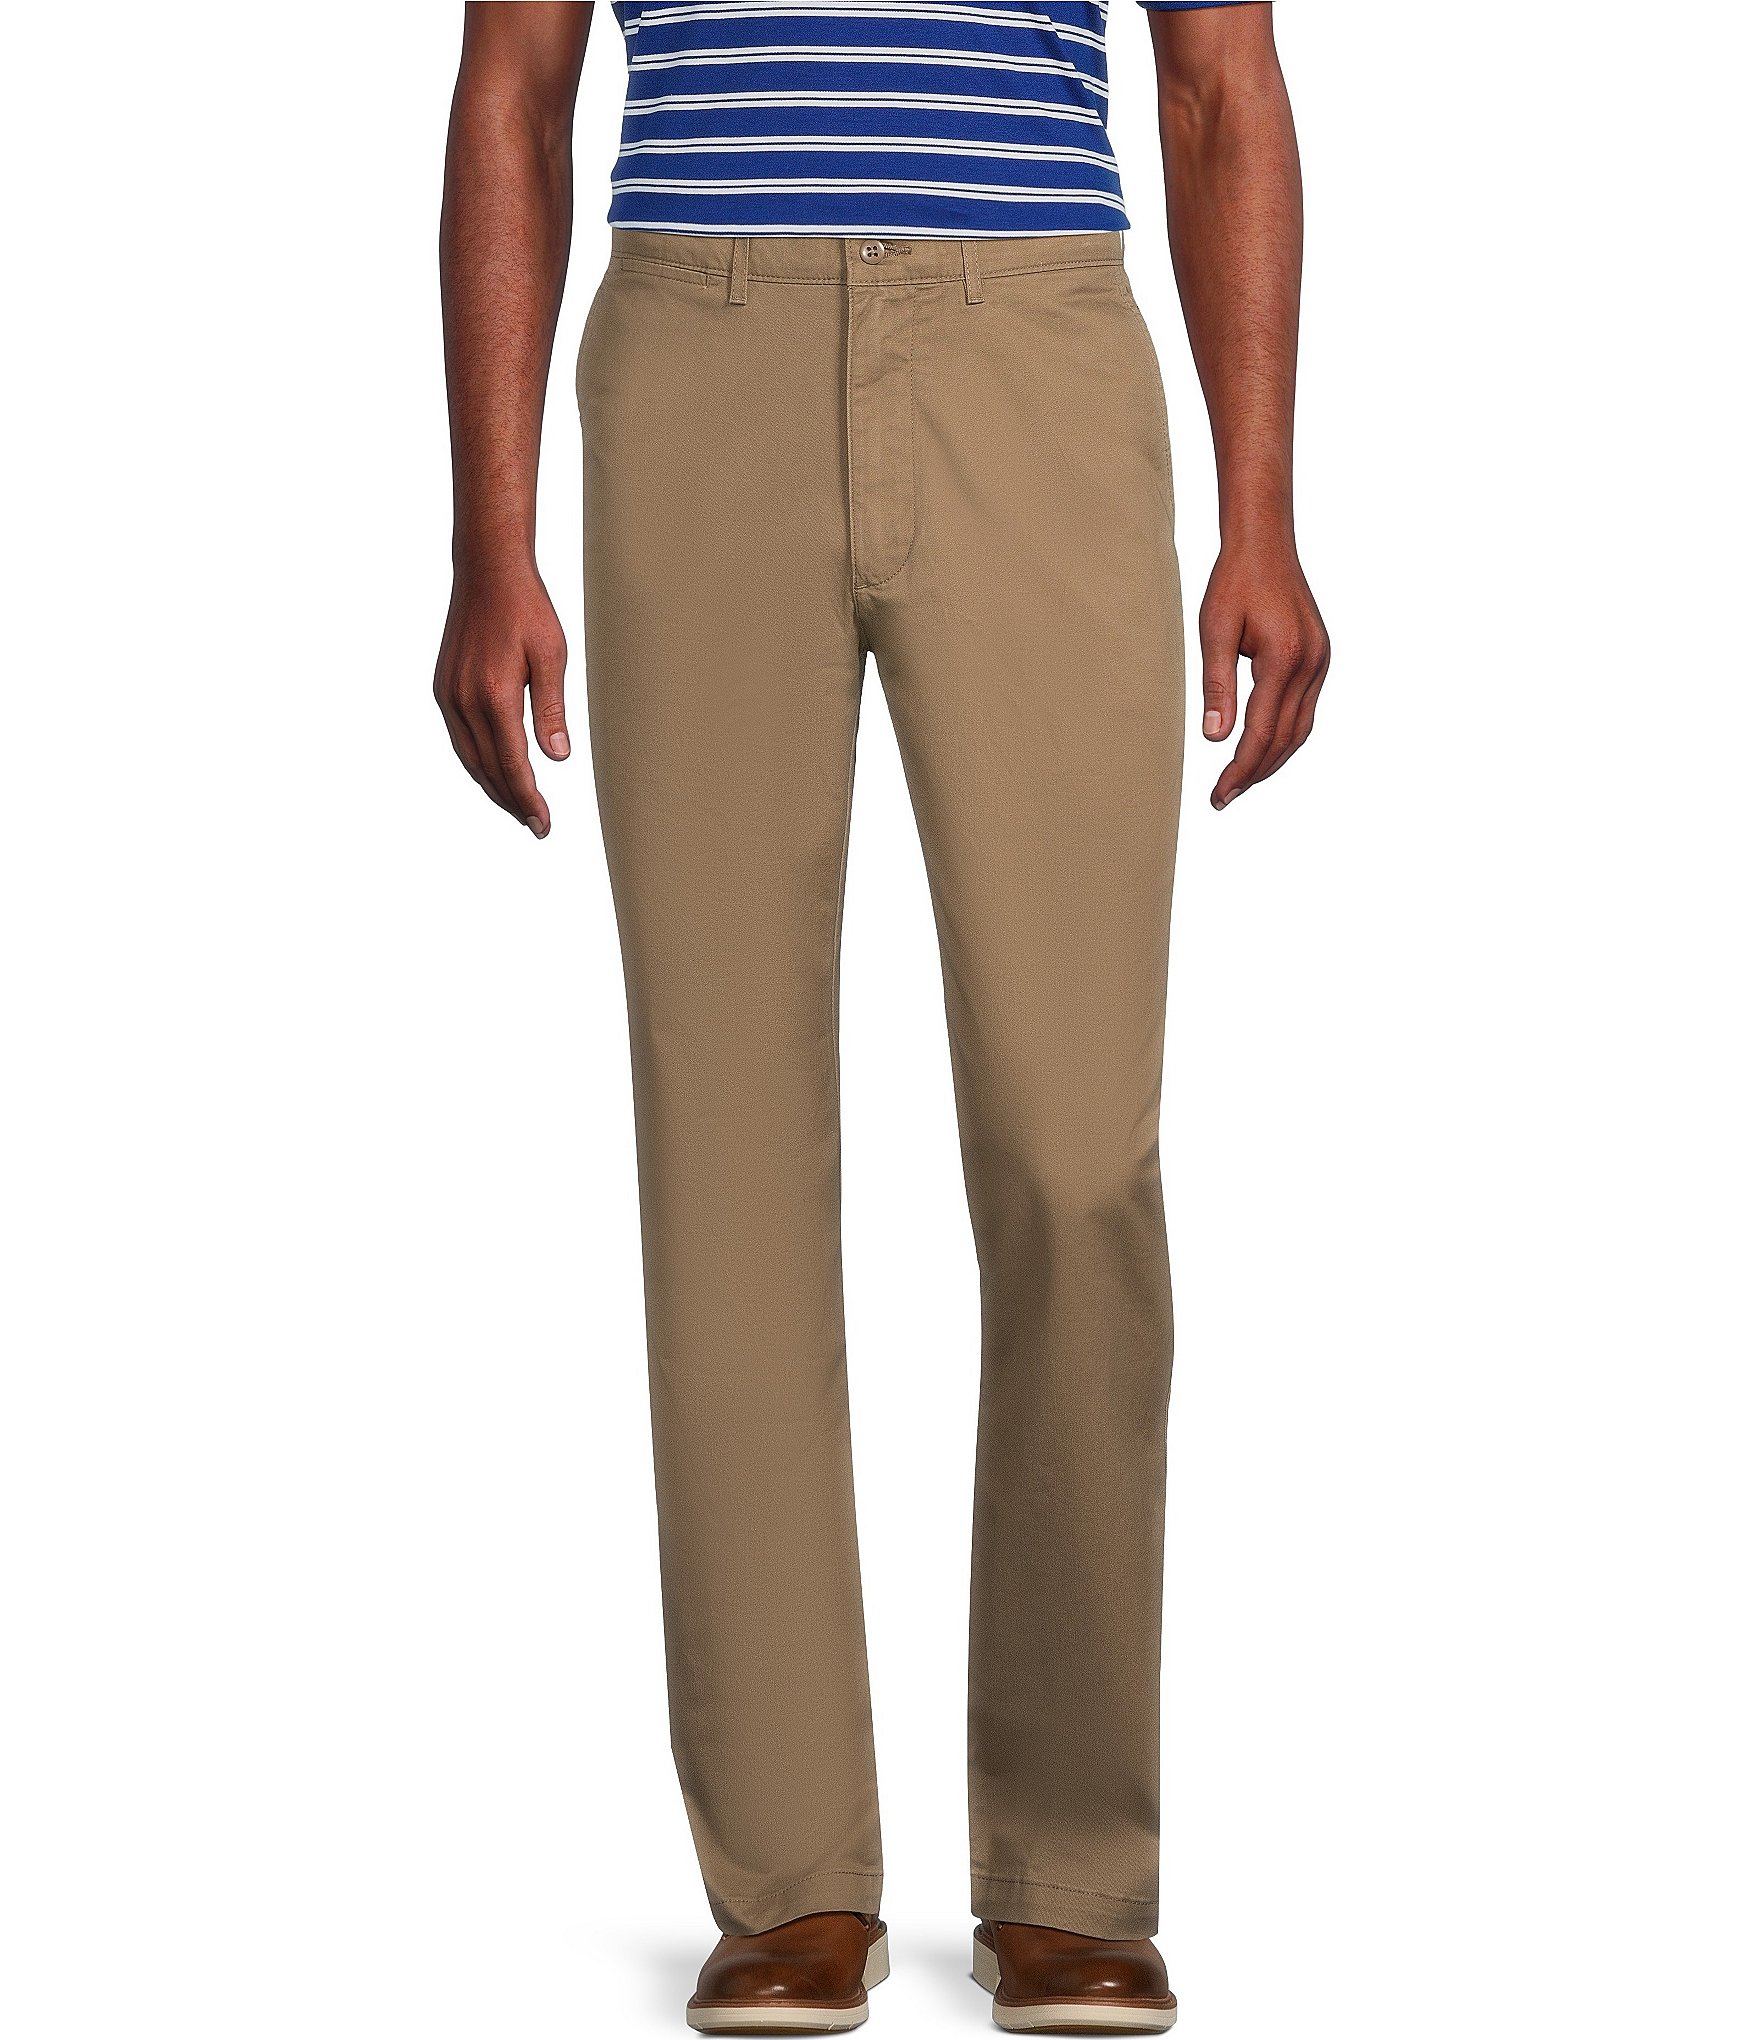 Cremieux Blue Label Madison Comfort Stretch Flat Front Twill Chino ...